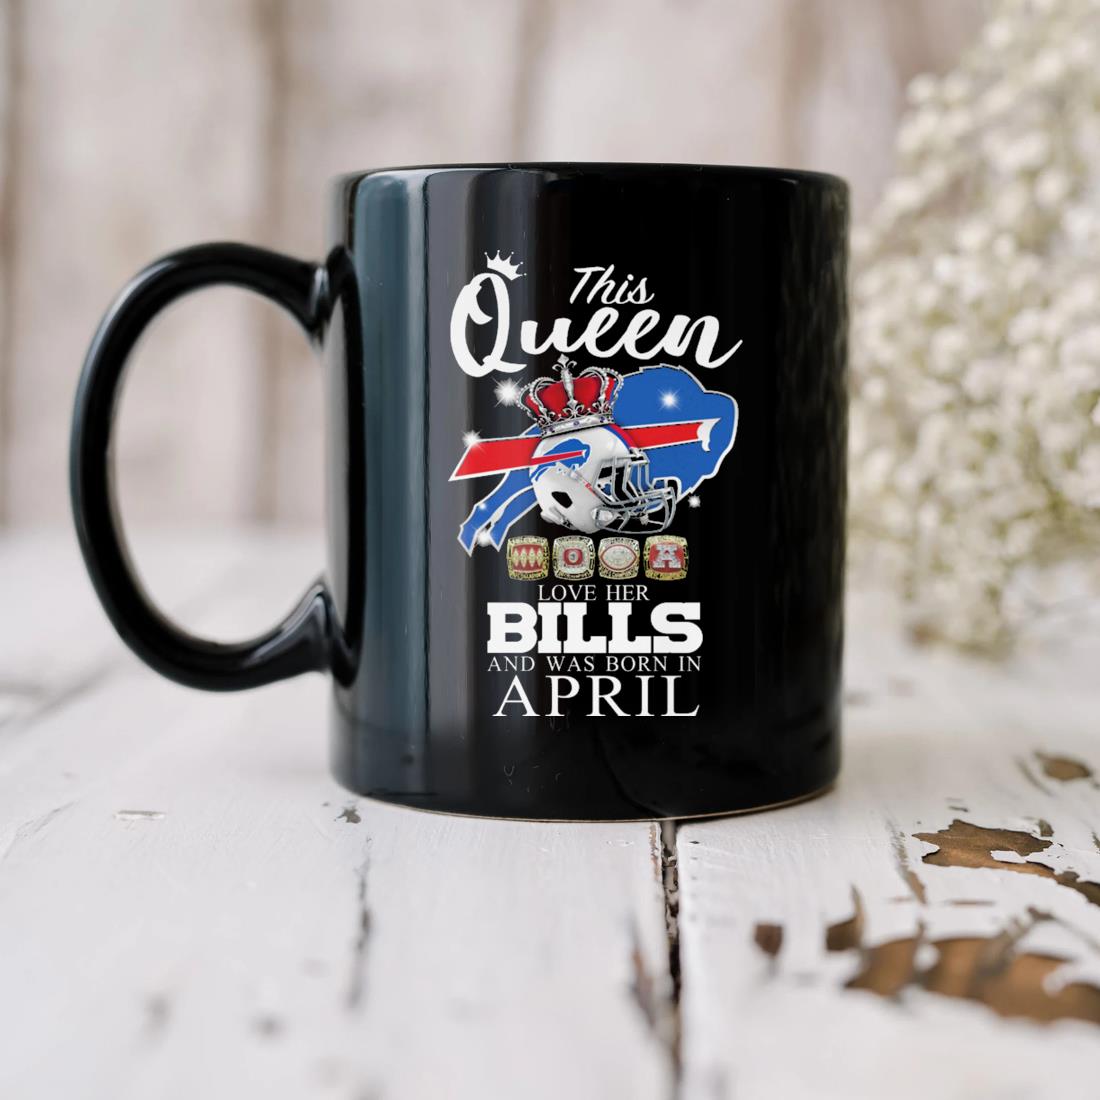 This Queen Love Her Bills And Was Born In April Mug